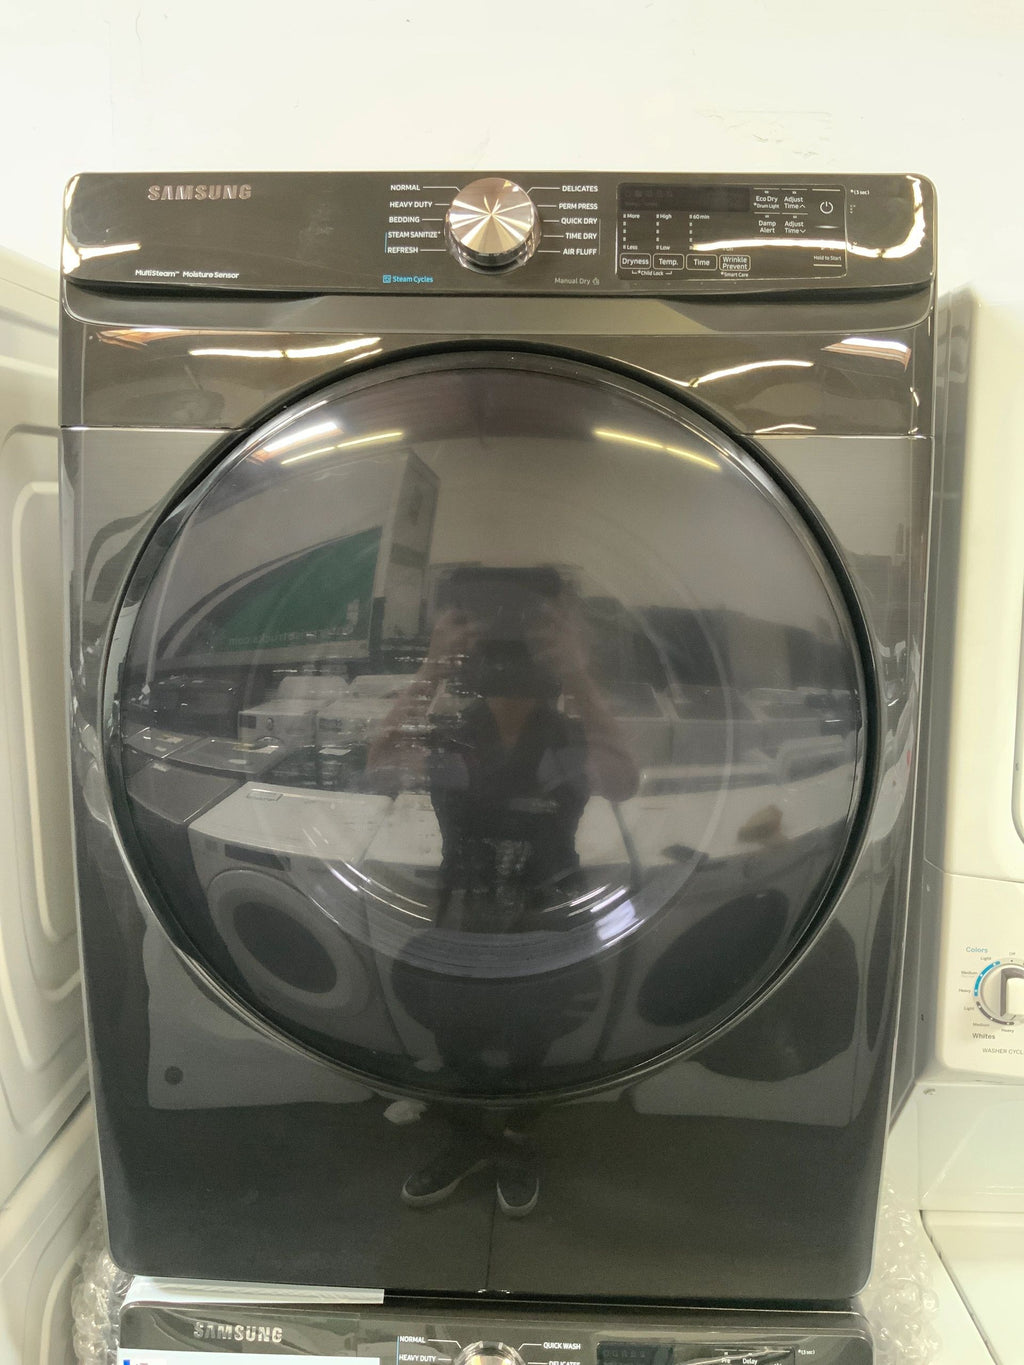 New Open Box. 7.5 cu. ft. Gas Dryer with Steam Sanitize+ in Black Stainless Steel. Model: DVG45R6100V